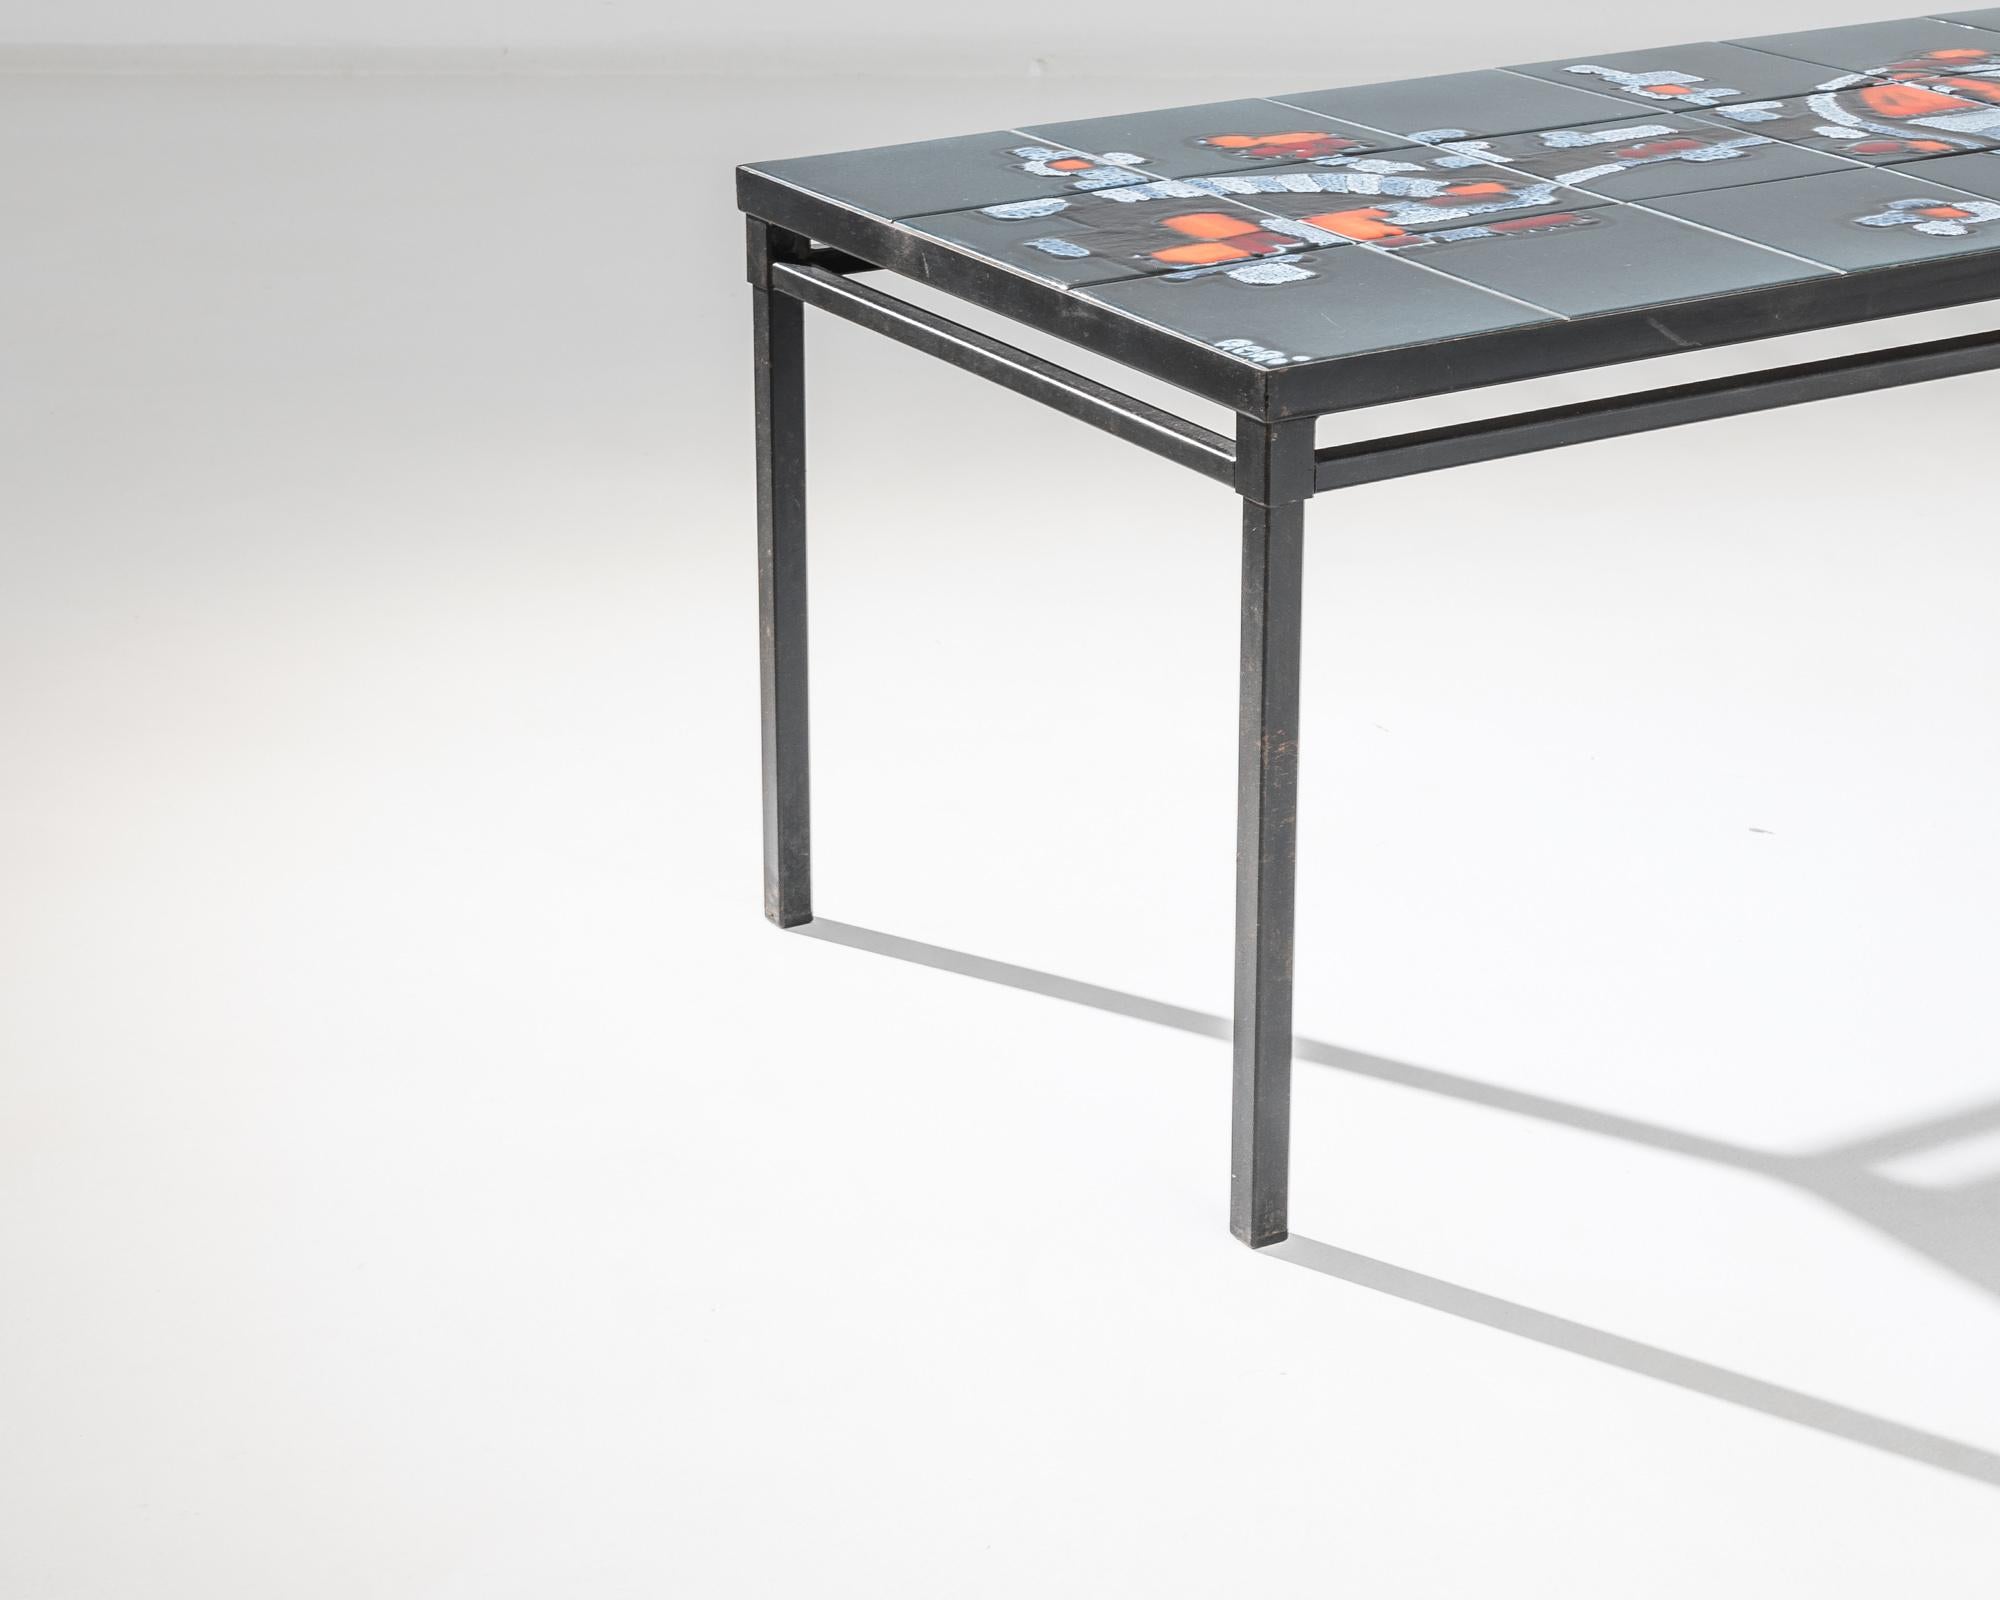 Discover a unique blend of form and function with this 1960s French Metal Coffee Table, crowned with a striking Ceramic Top. The sleek, minimalist frame crafted from robust metal provides a sturdy foundation for the intricately designed ceramic